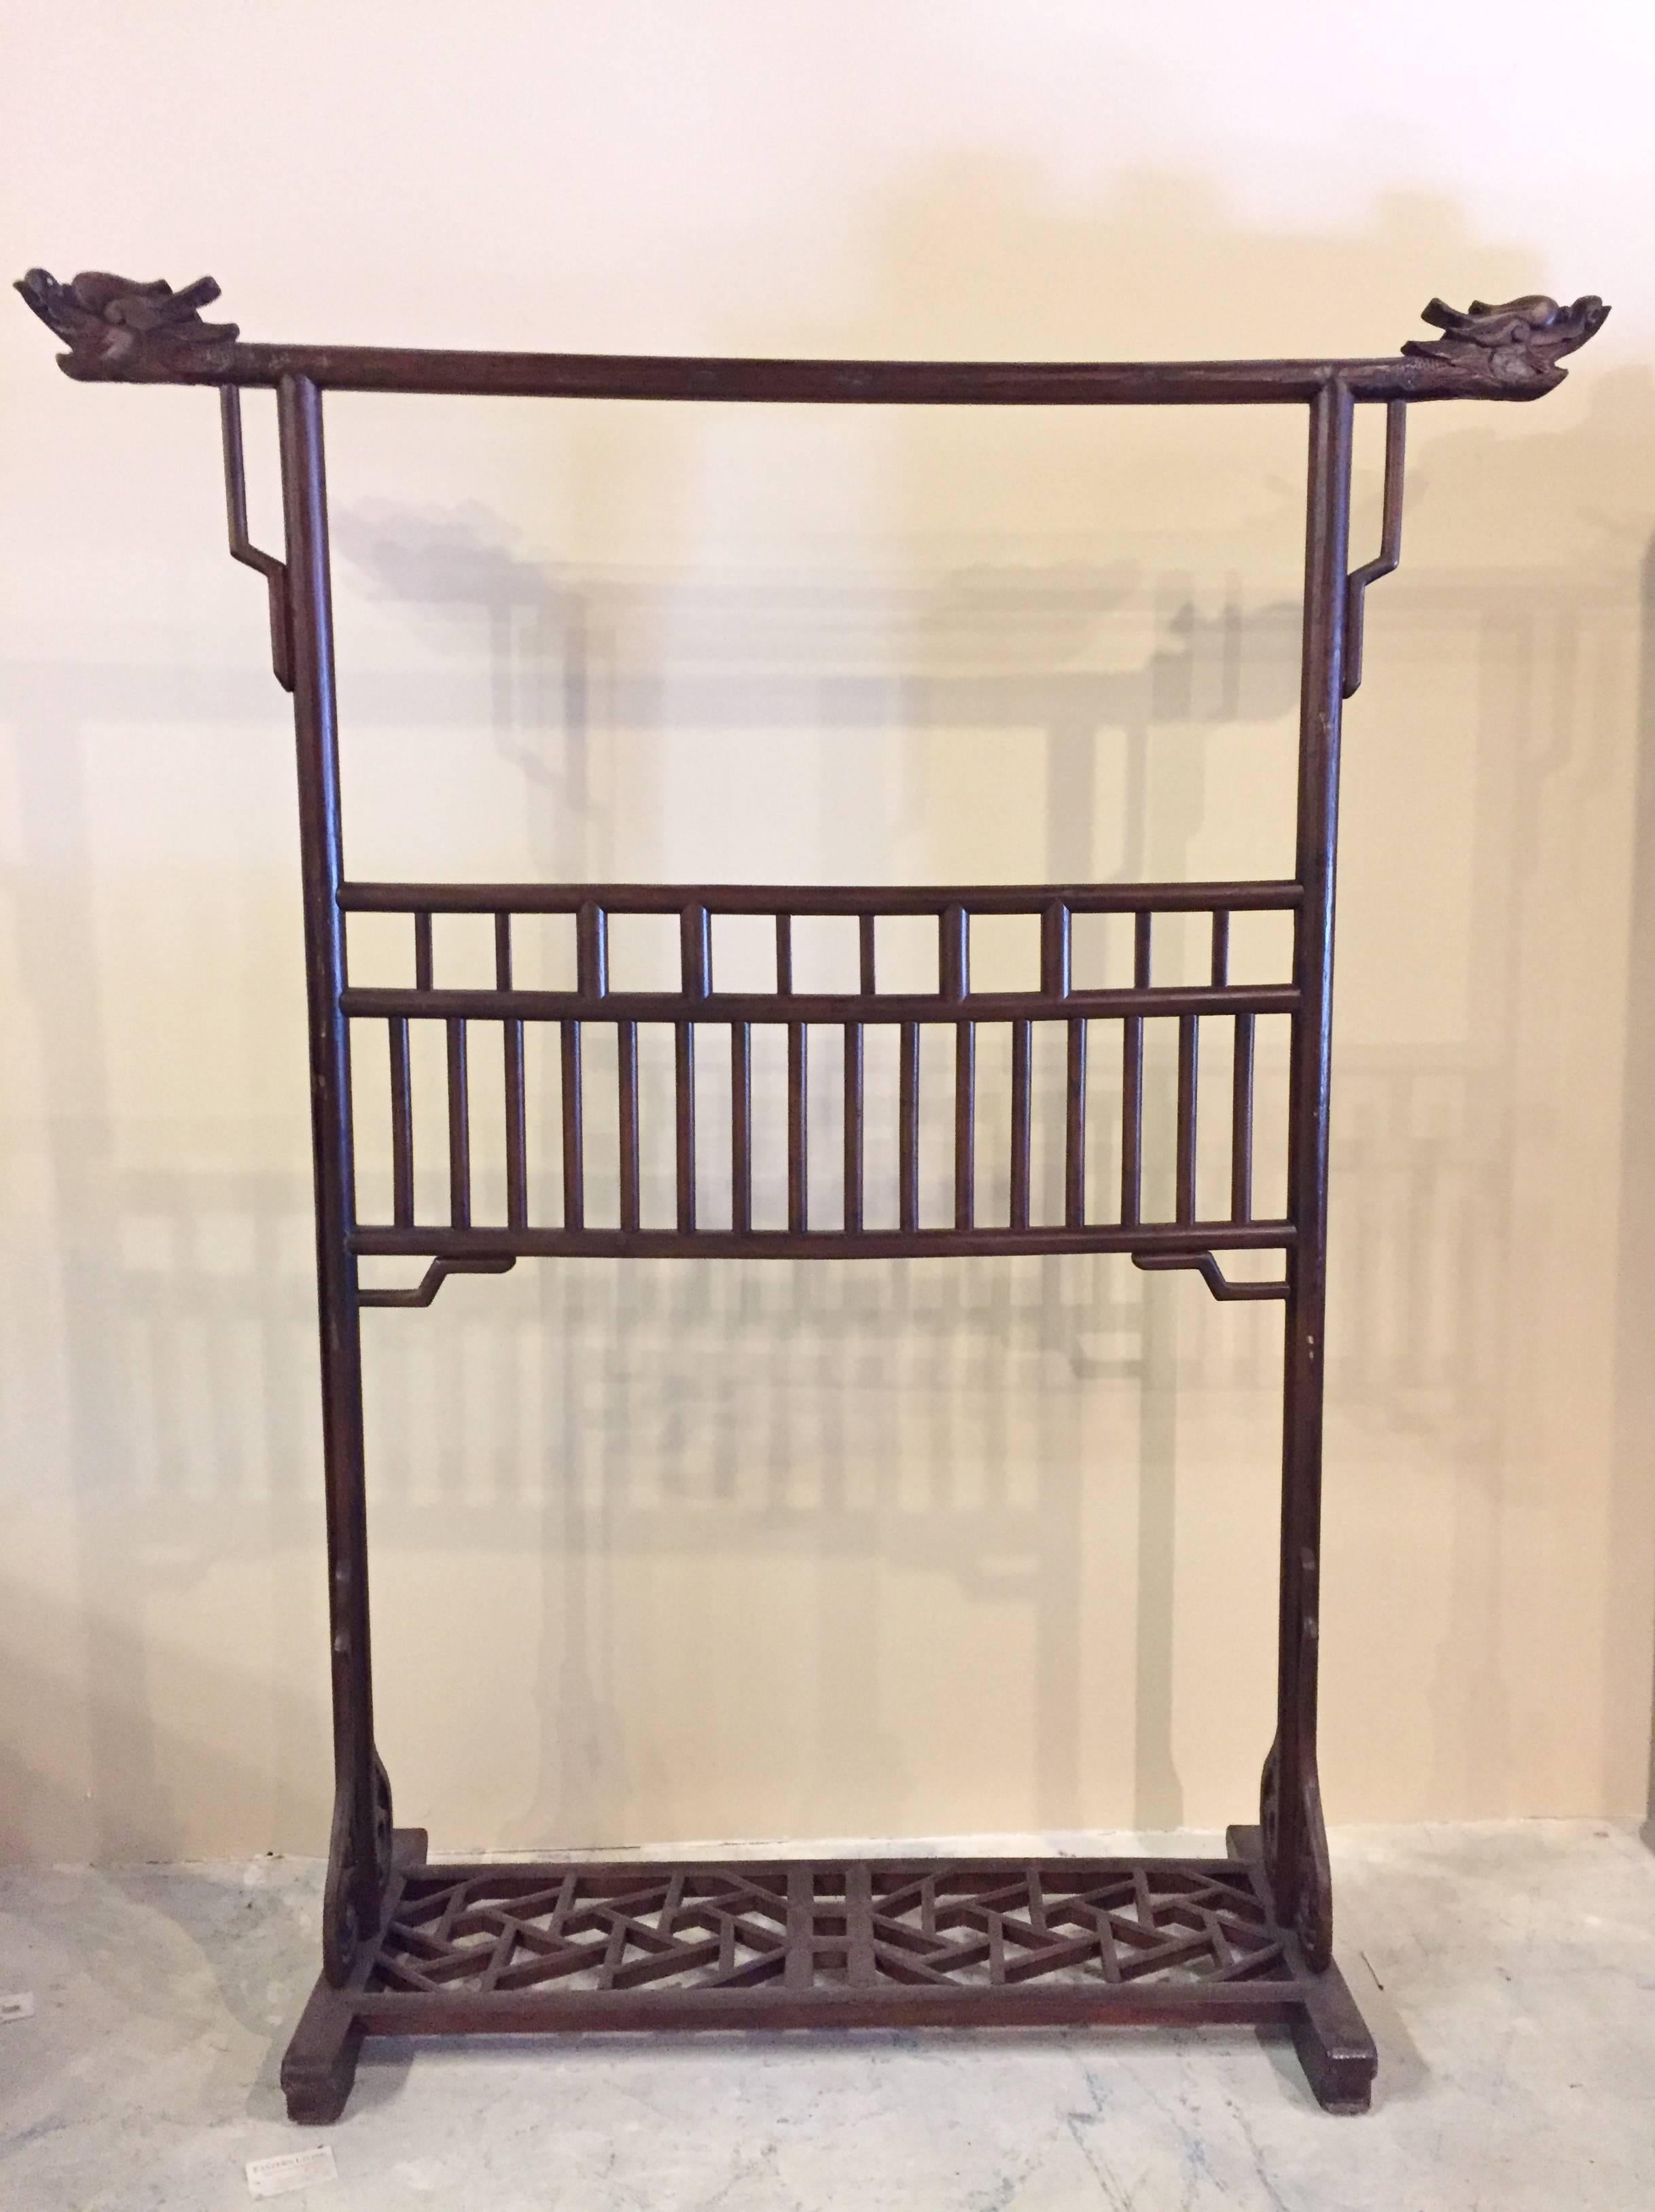 The garment rack is an unique piece of furniture used by the Chinese noblemen. Typically placed in a bedroom, it holds the robes they wear. 

This piece is very large. Standing at an impressive 6.5' tall, it belonged to an important imperial